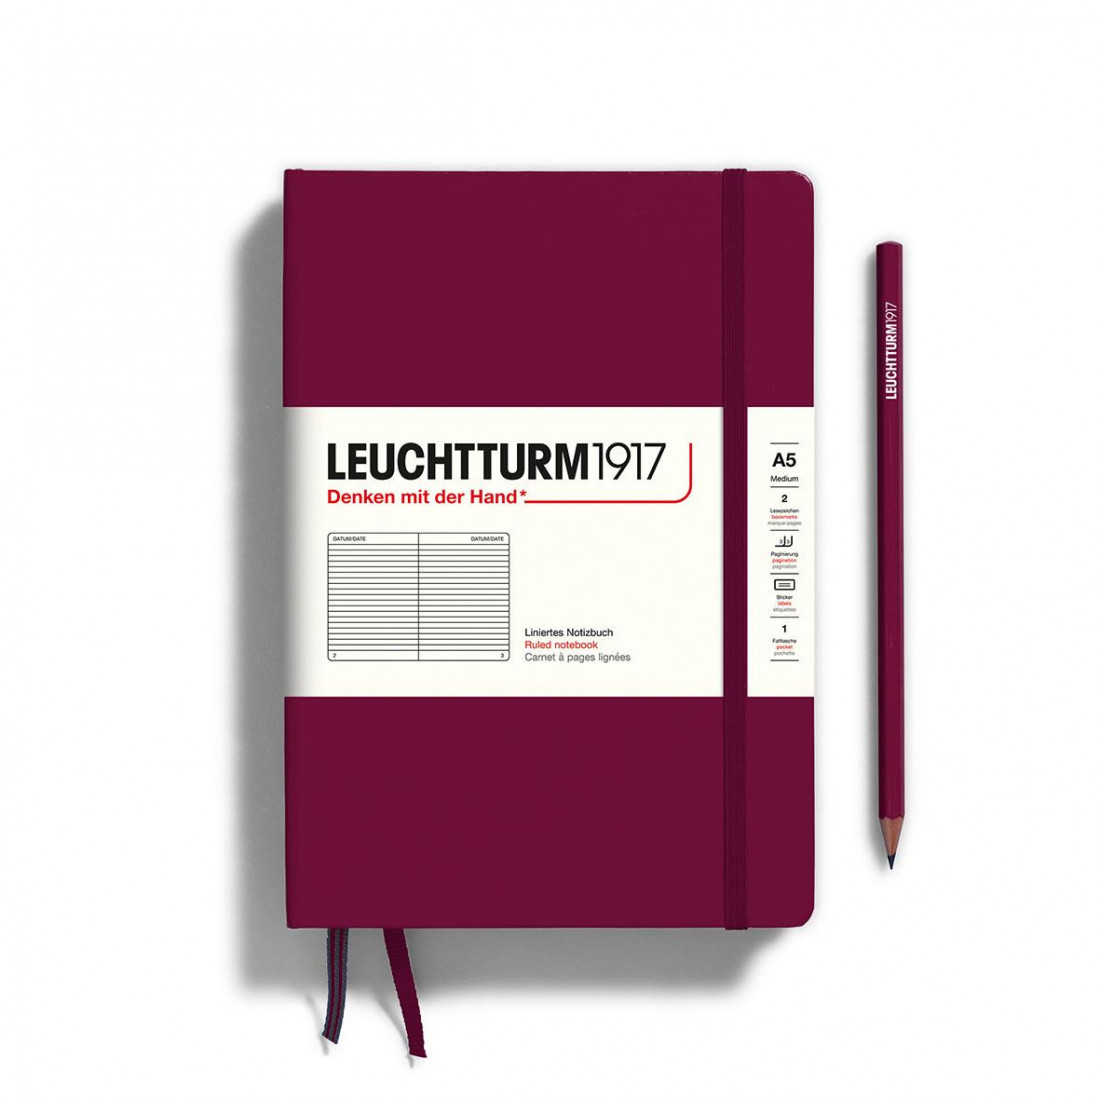 Leuchtturm 1917 Notebook A5 Hardcover 251 numbered pages Port Red ruled